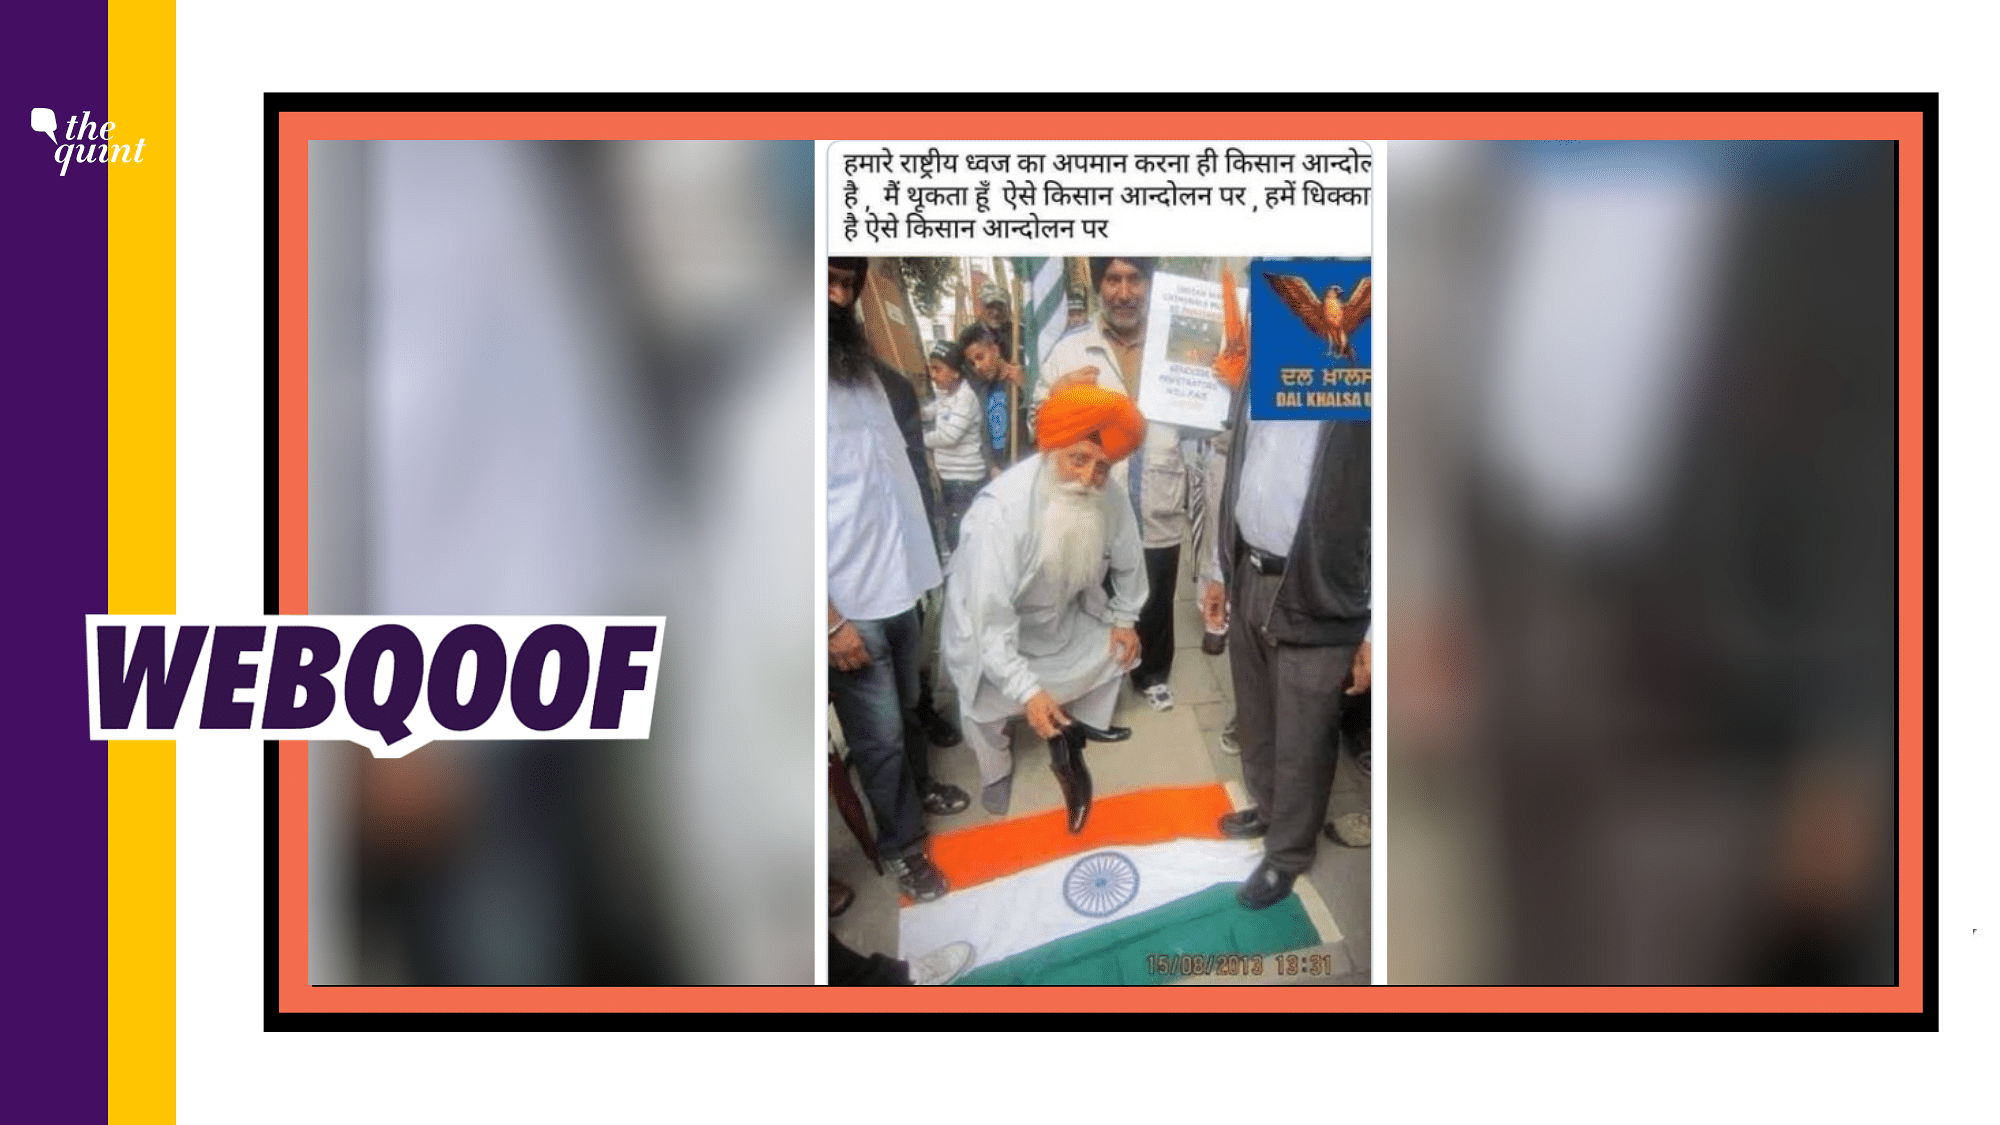 The image could be traced back to August 2013, when pro-Khalistan group members had gathered in London.